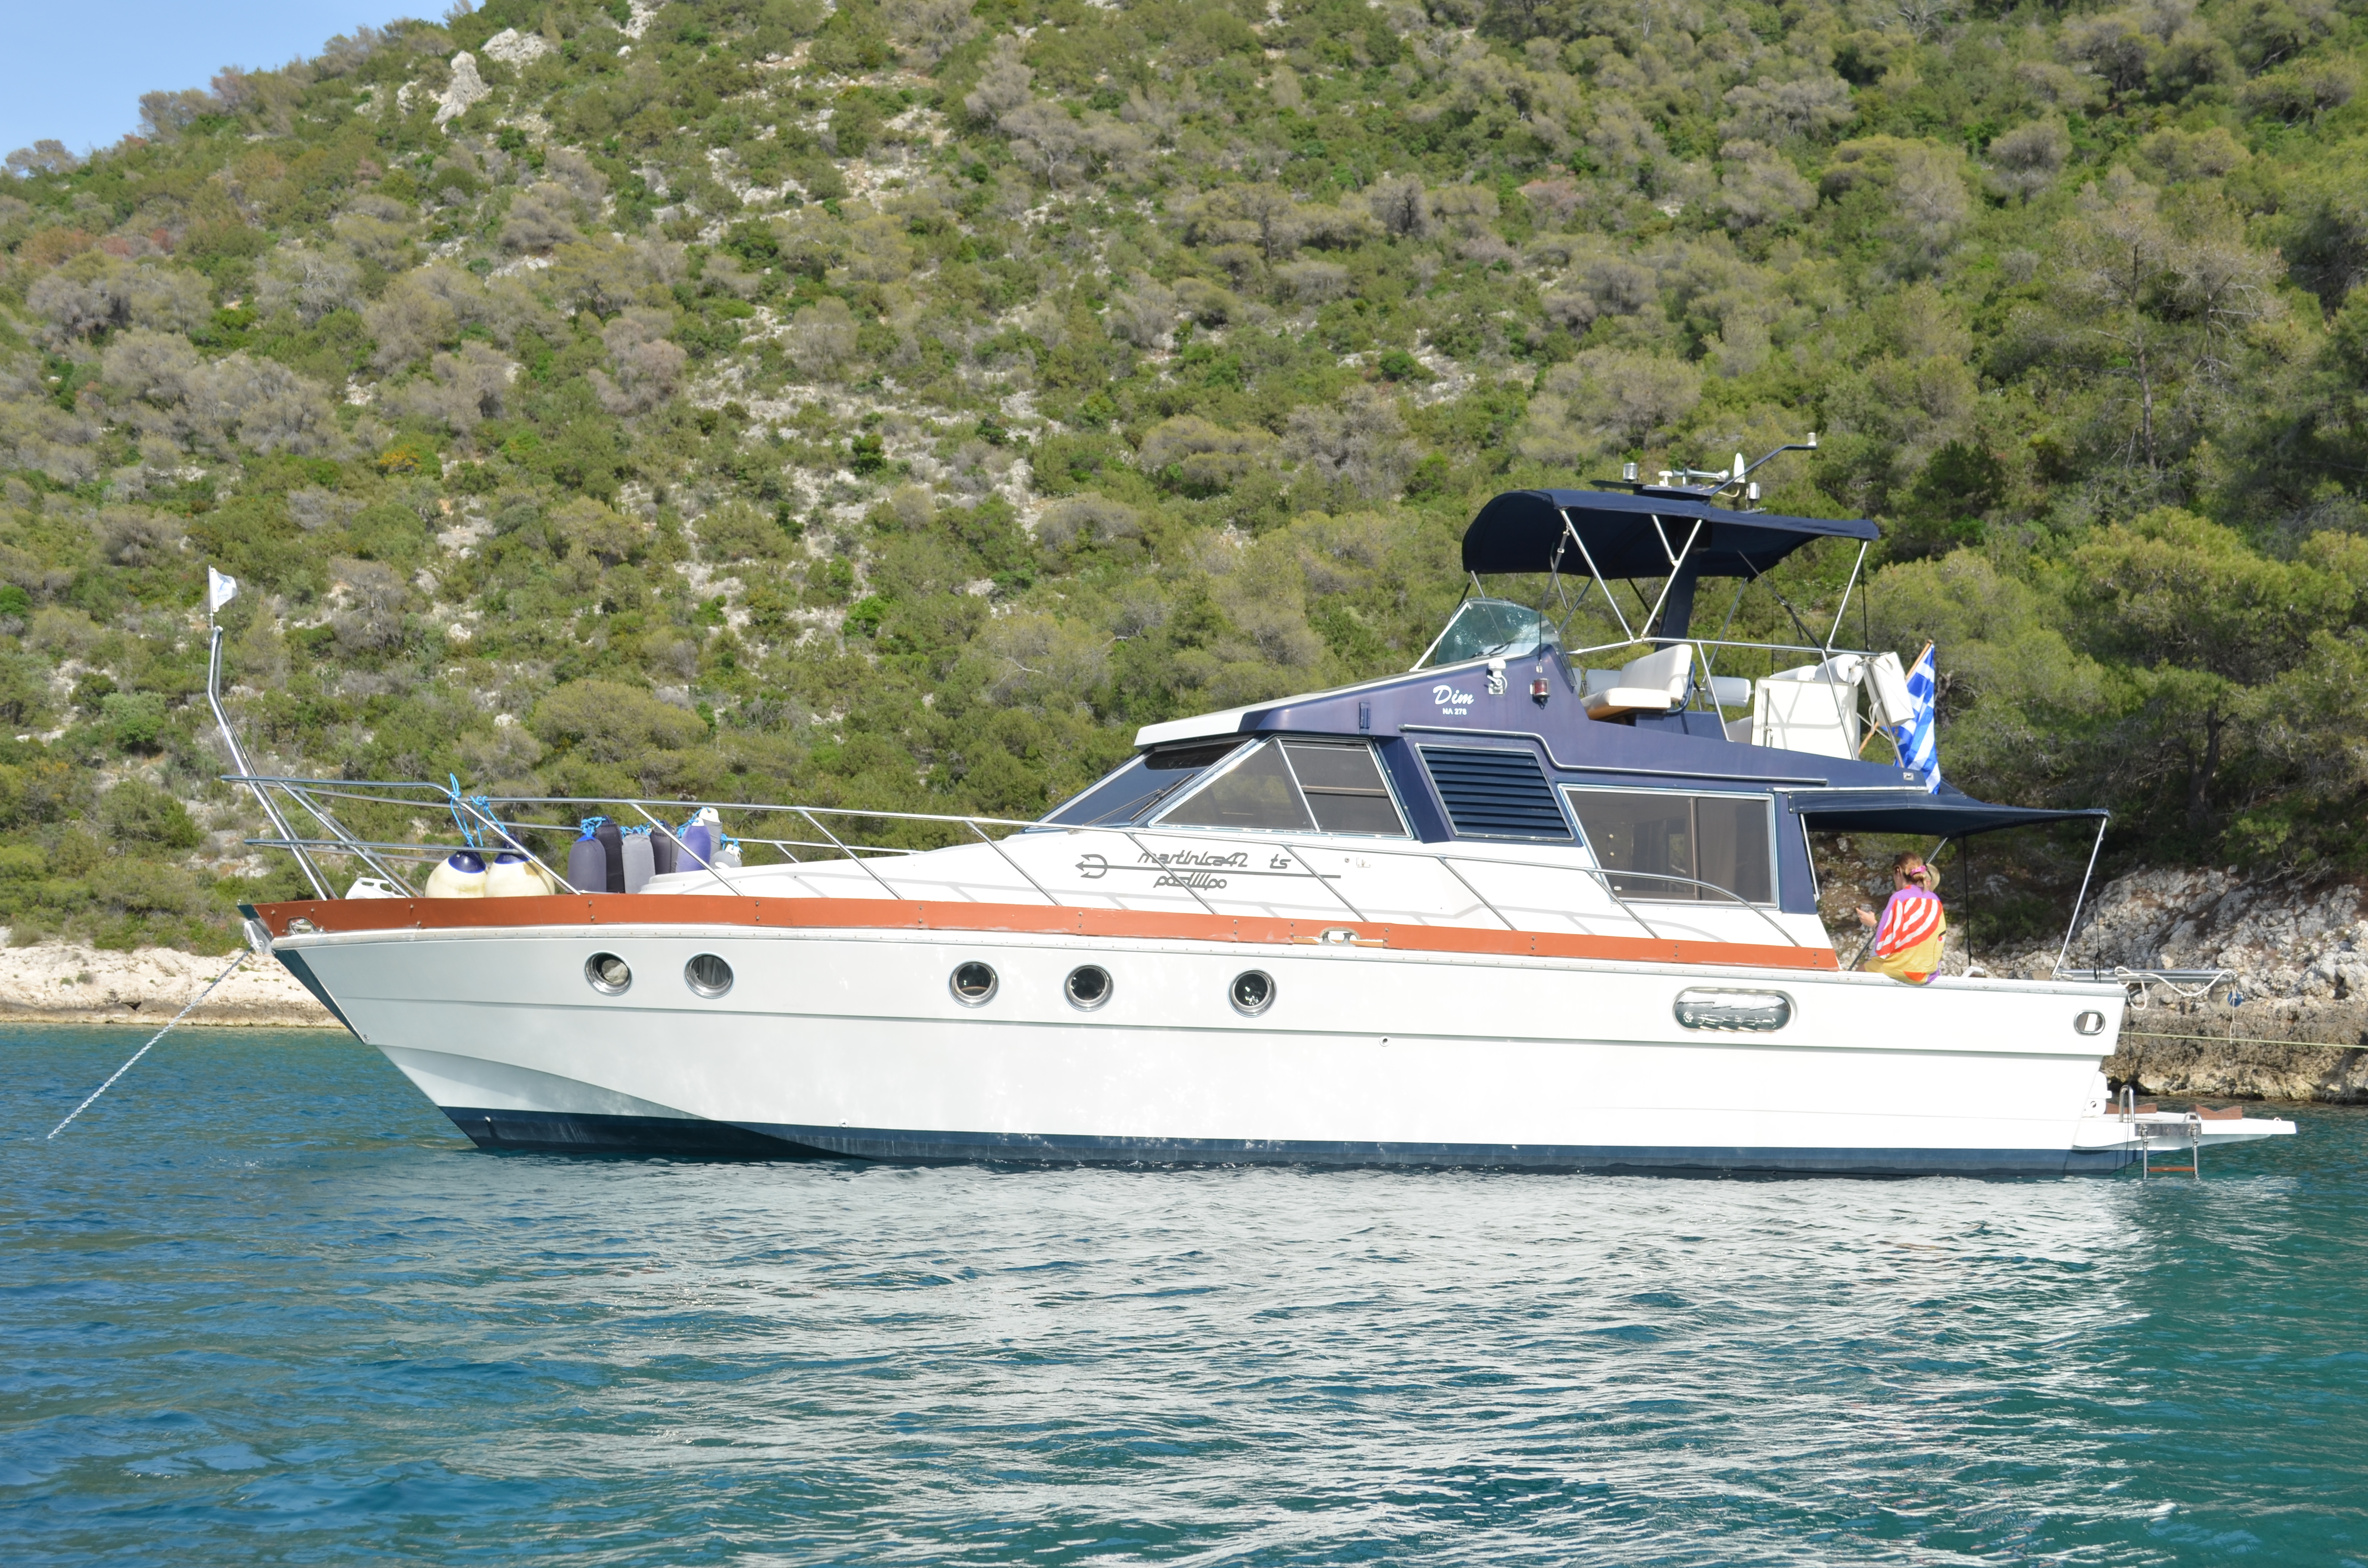 Martinica 42 TS - Gulet charter Greece & Boat hire in Greece Athens and Saronic Gulf Isthmia Isthmia 2